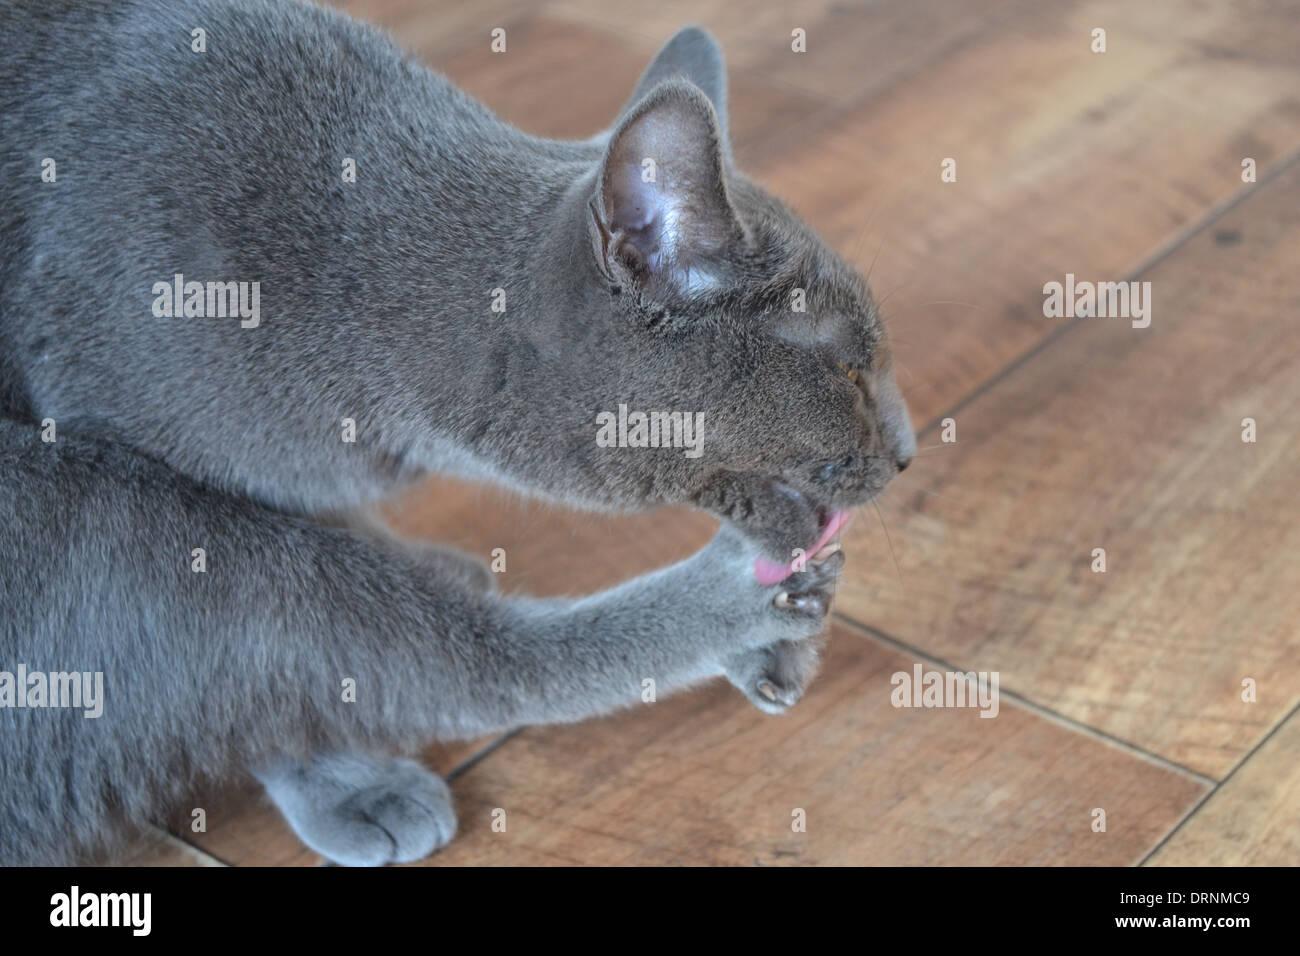 Russian Blue cat cleaning her paws Stock Photo